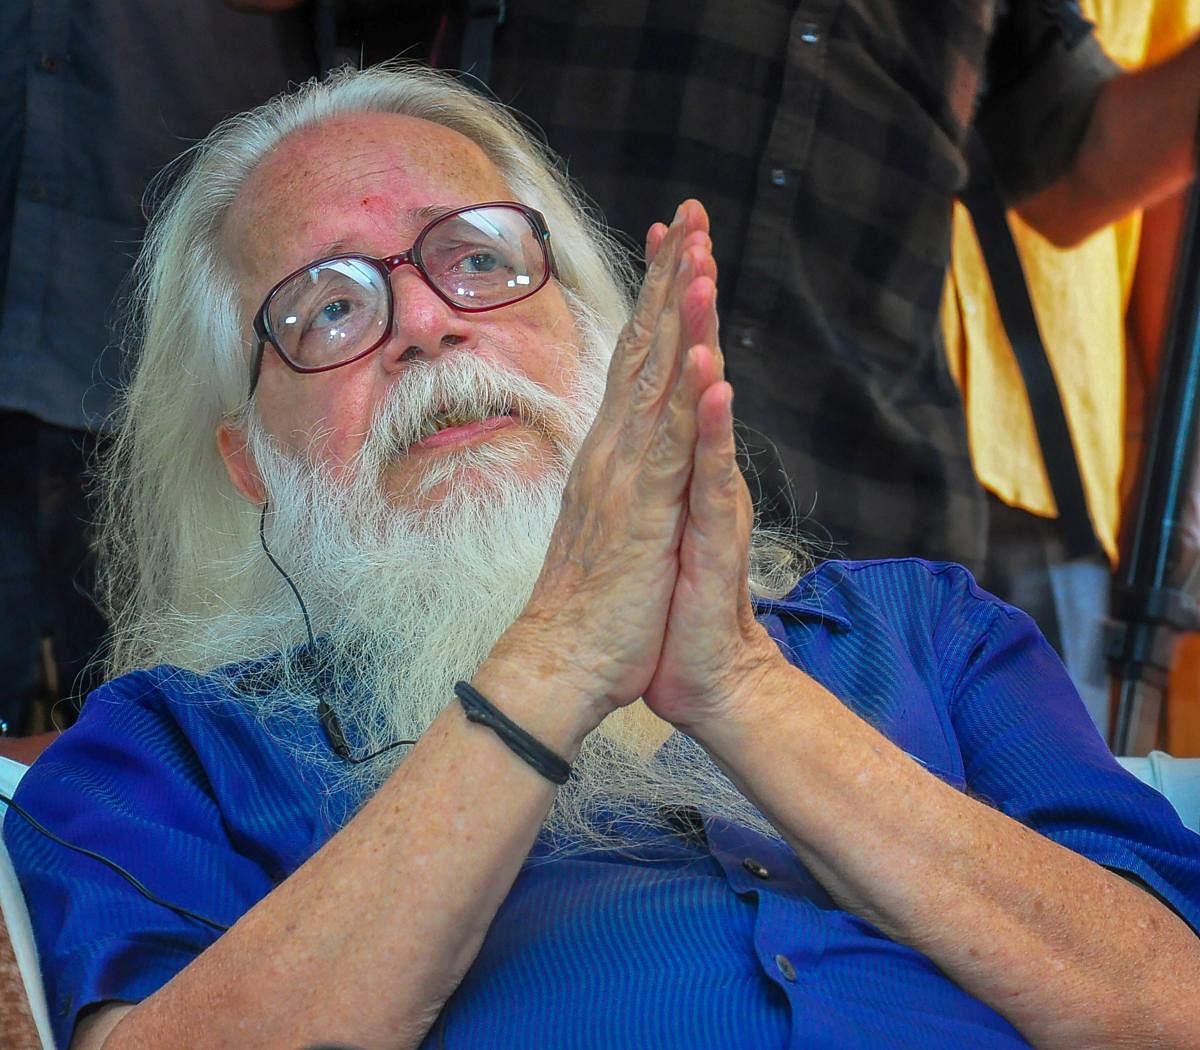 The Supreme Court on September 14 held that Nambi Narayanan was “arrested unnecessarily, harassed and subjected to mental cruelty” in a 1994 espionage case and ordered a probe into the role of Kerala police officers. PTI